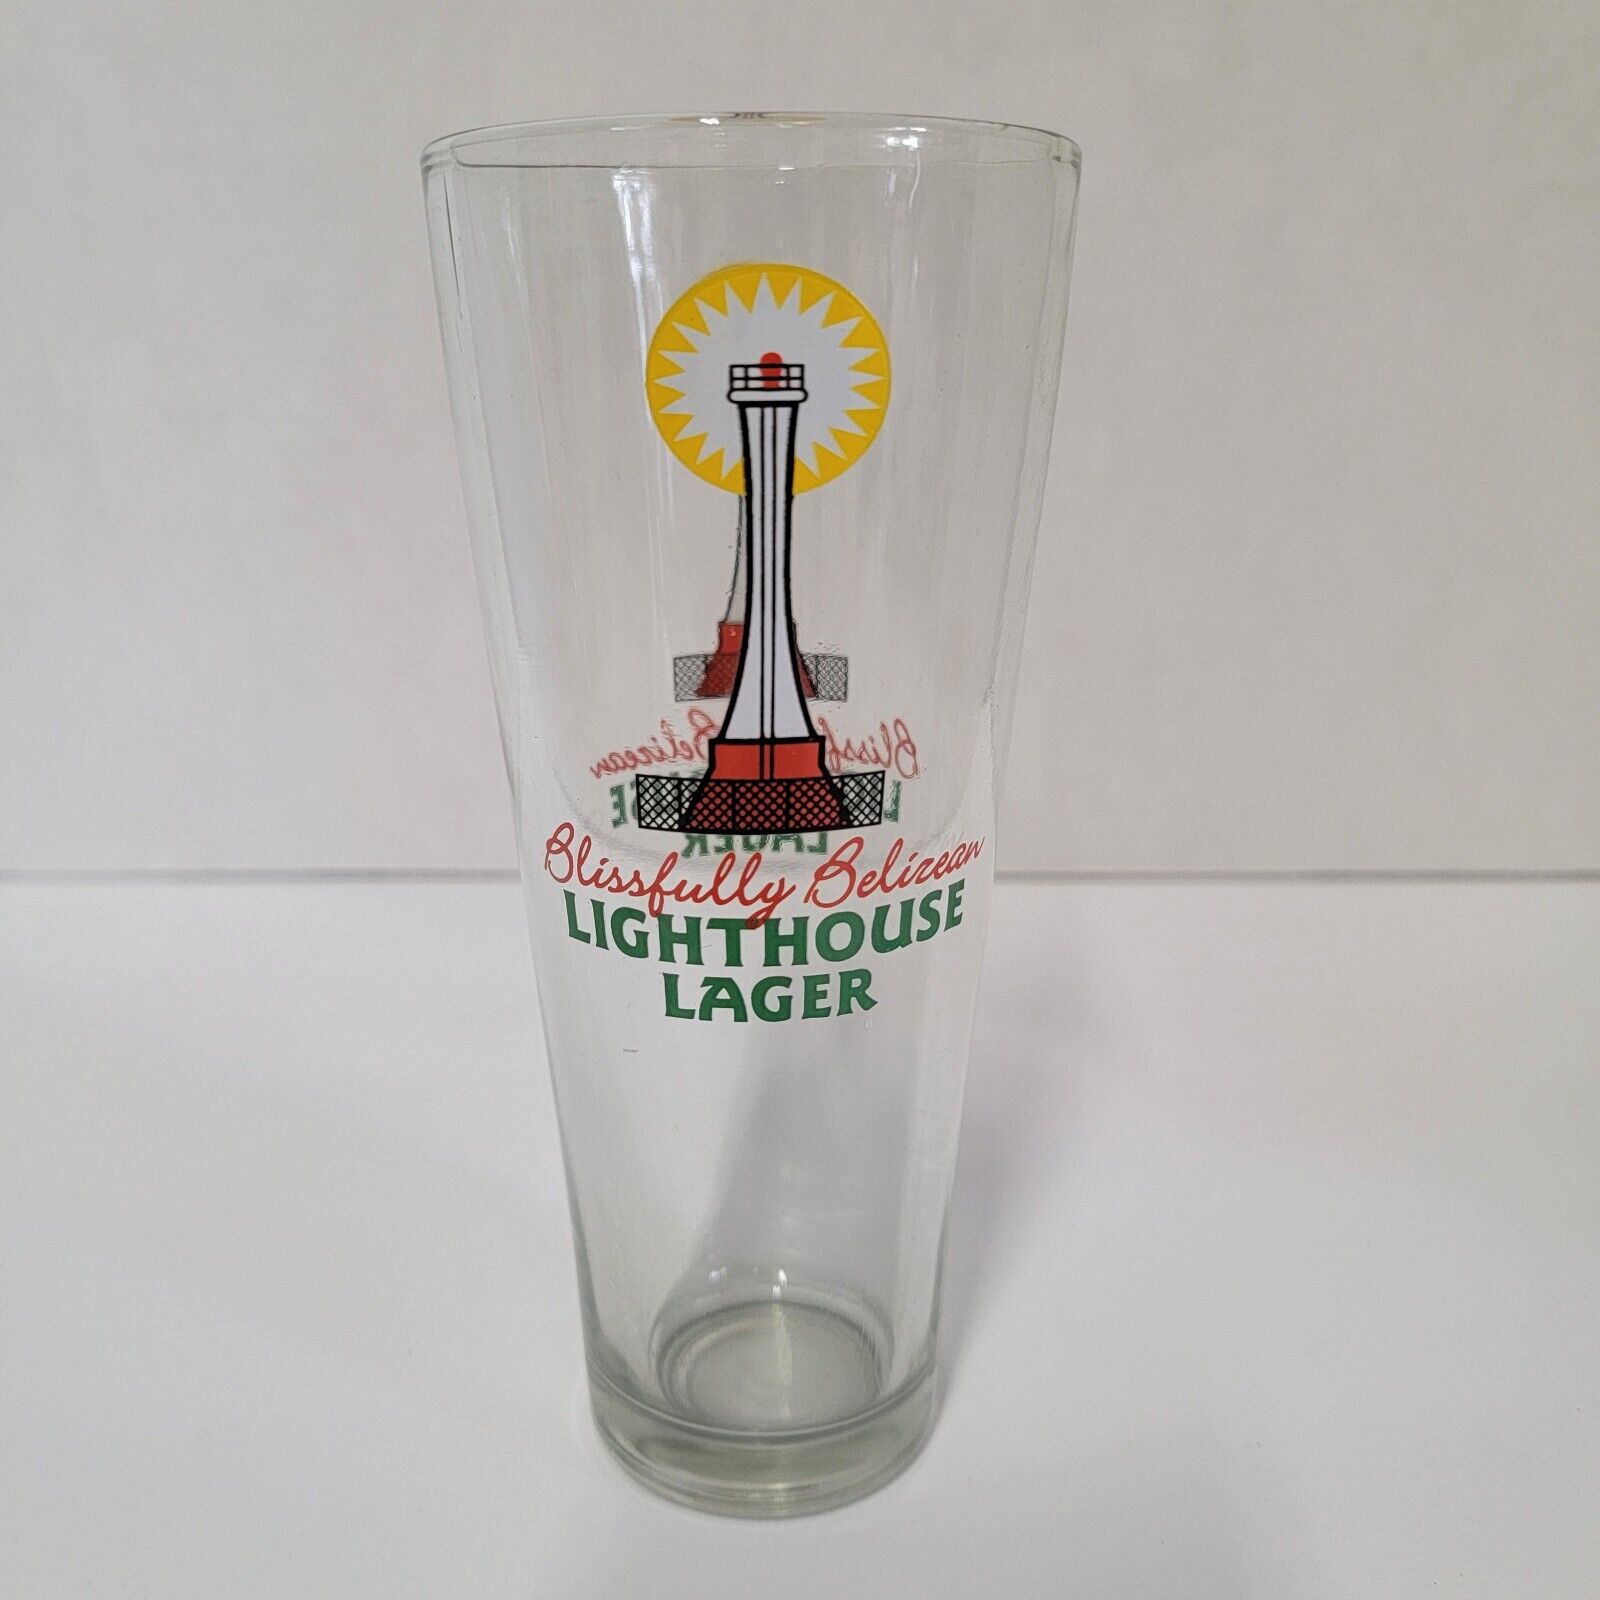 Lighthouse Lager Beer Glass Belize Brewing Co. Blissfully Belizean 